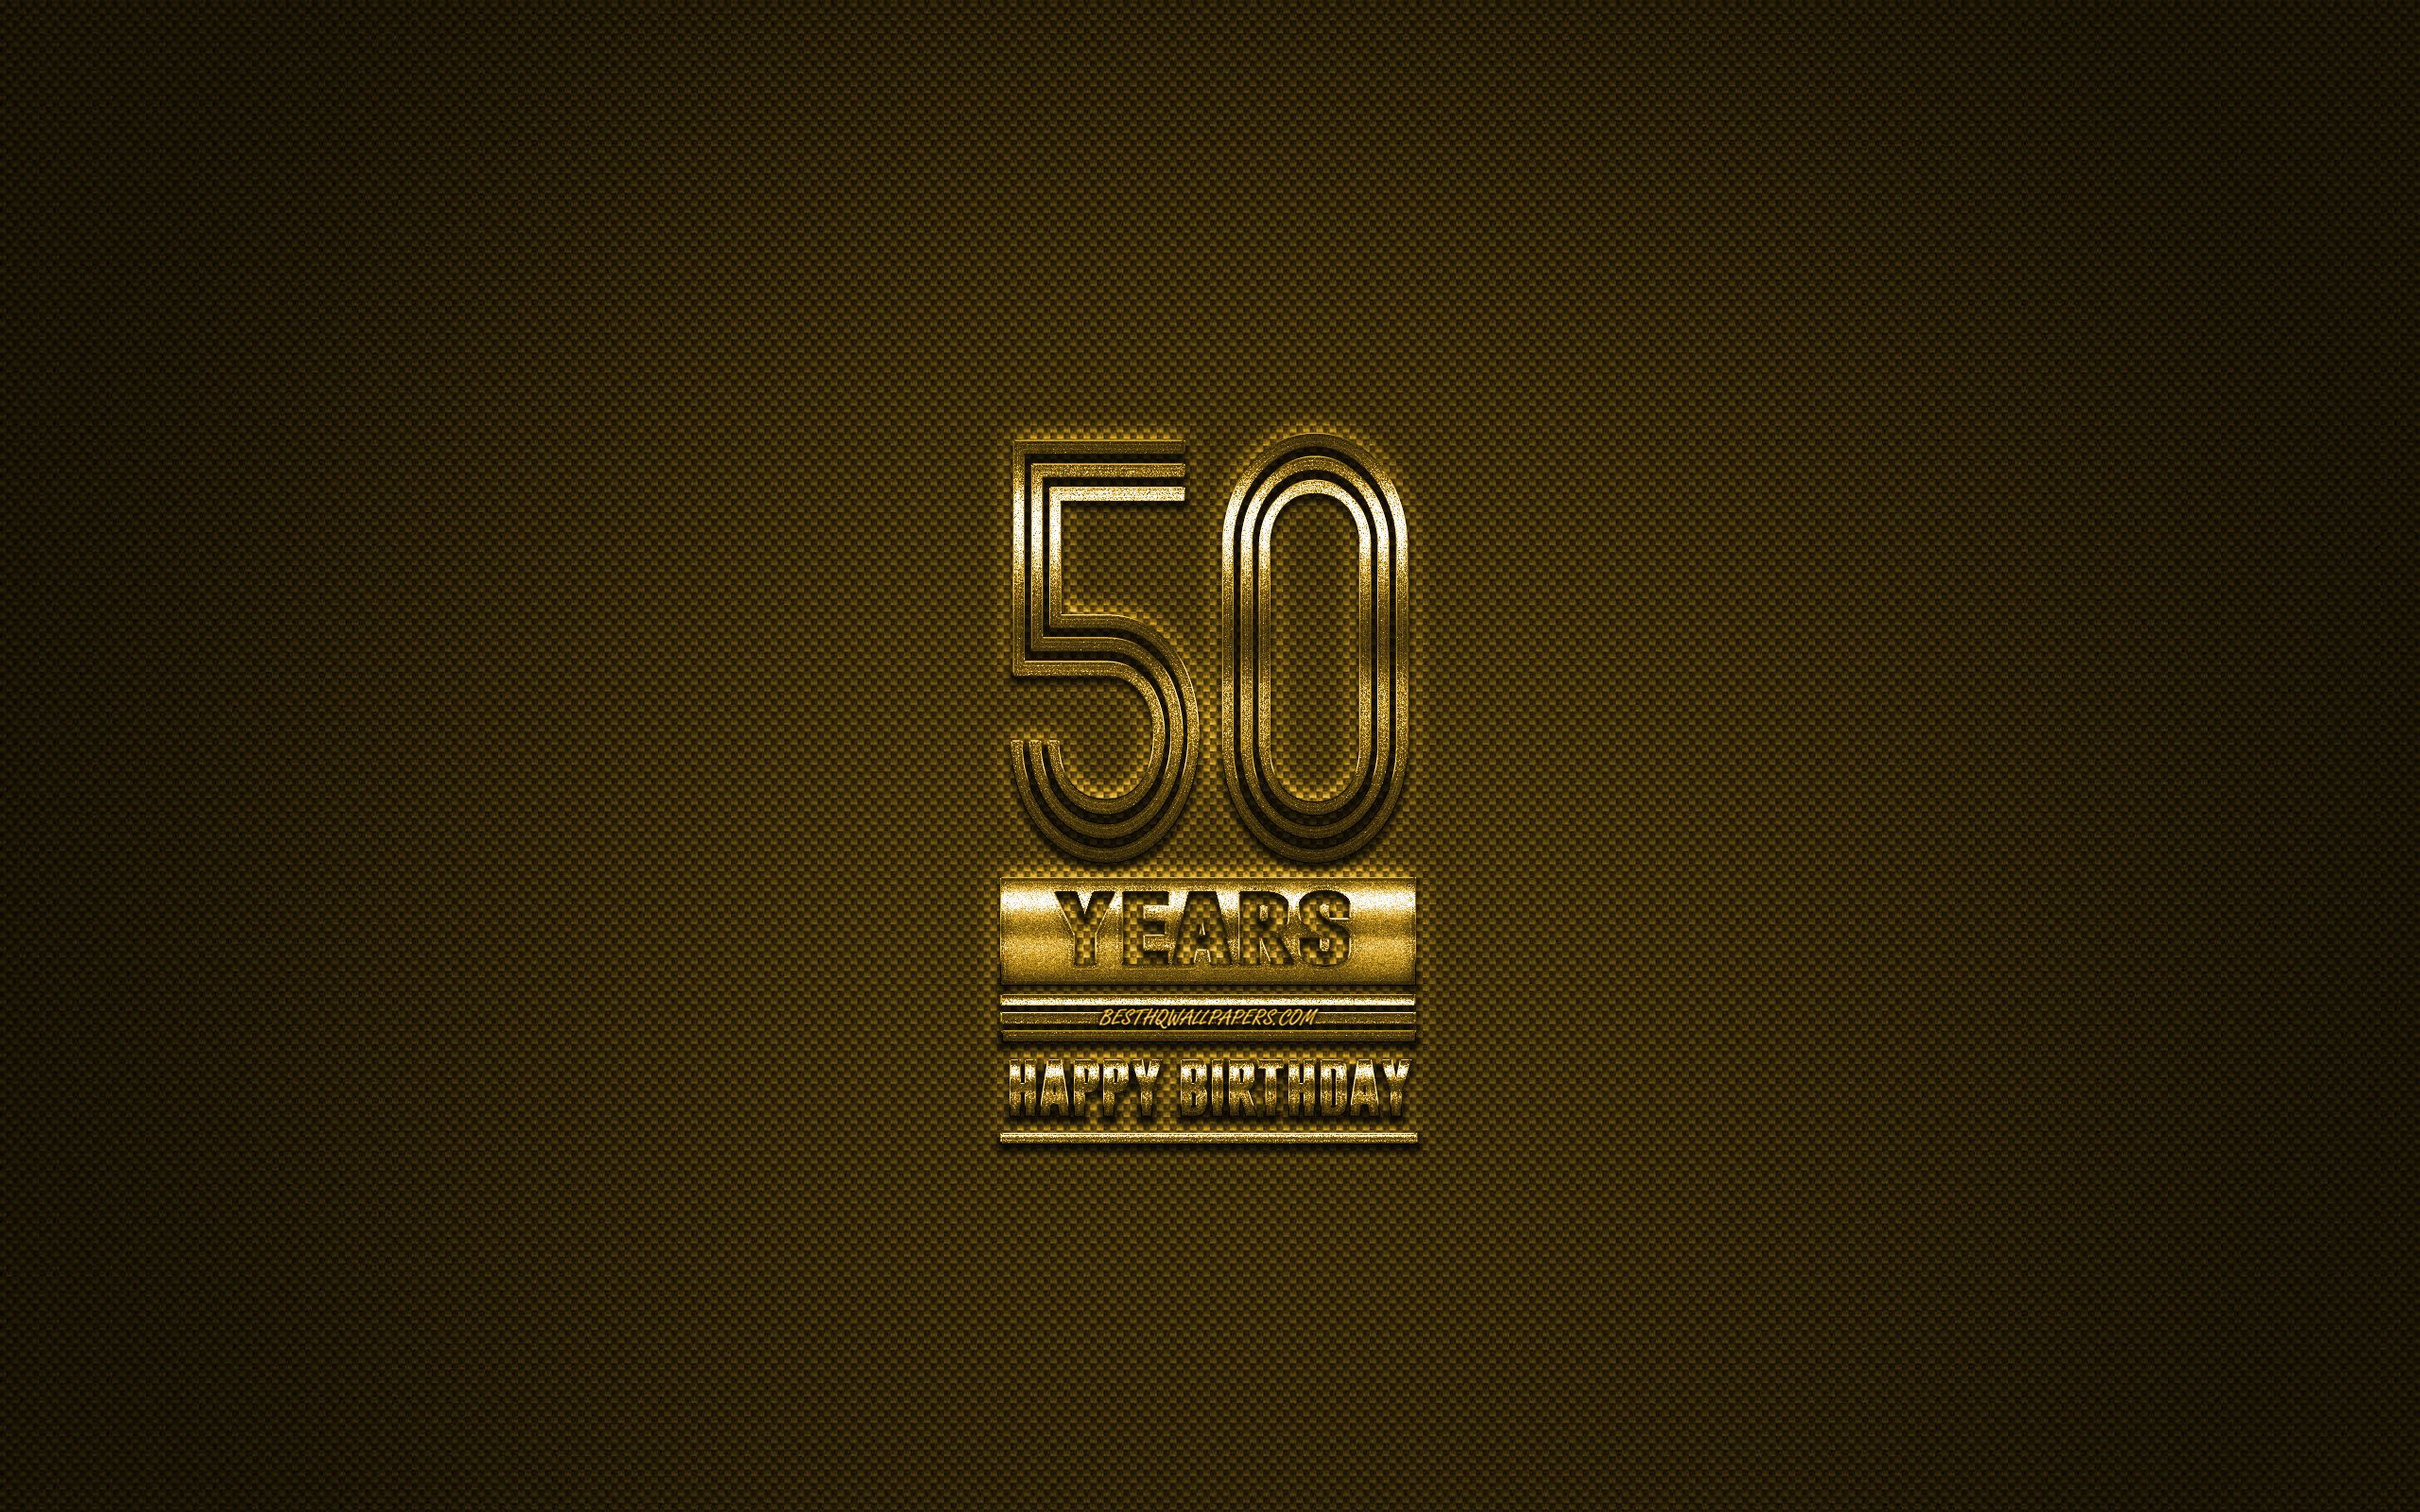 Download wallpaper 50th Happy Birthday, Golden letters, Golden Birthday background, 50 Years Birthday, Happy 50th Birthday, golden carbon background, Happy Birthday, greeting card, Happy 50 Years Birthday for desktop with resolution 2560x1600